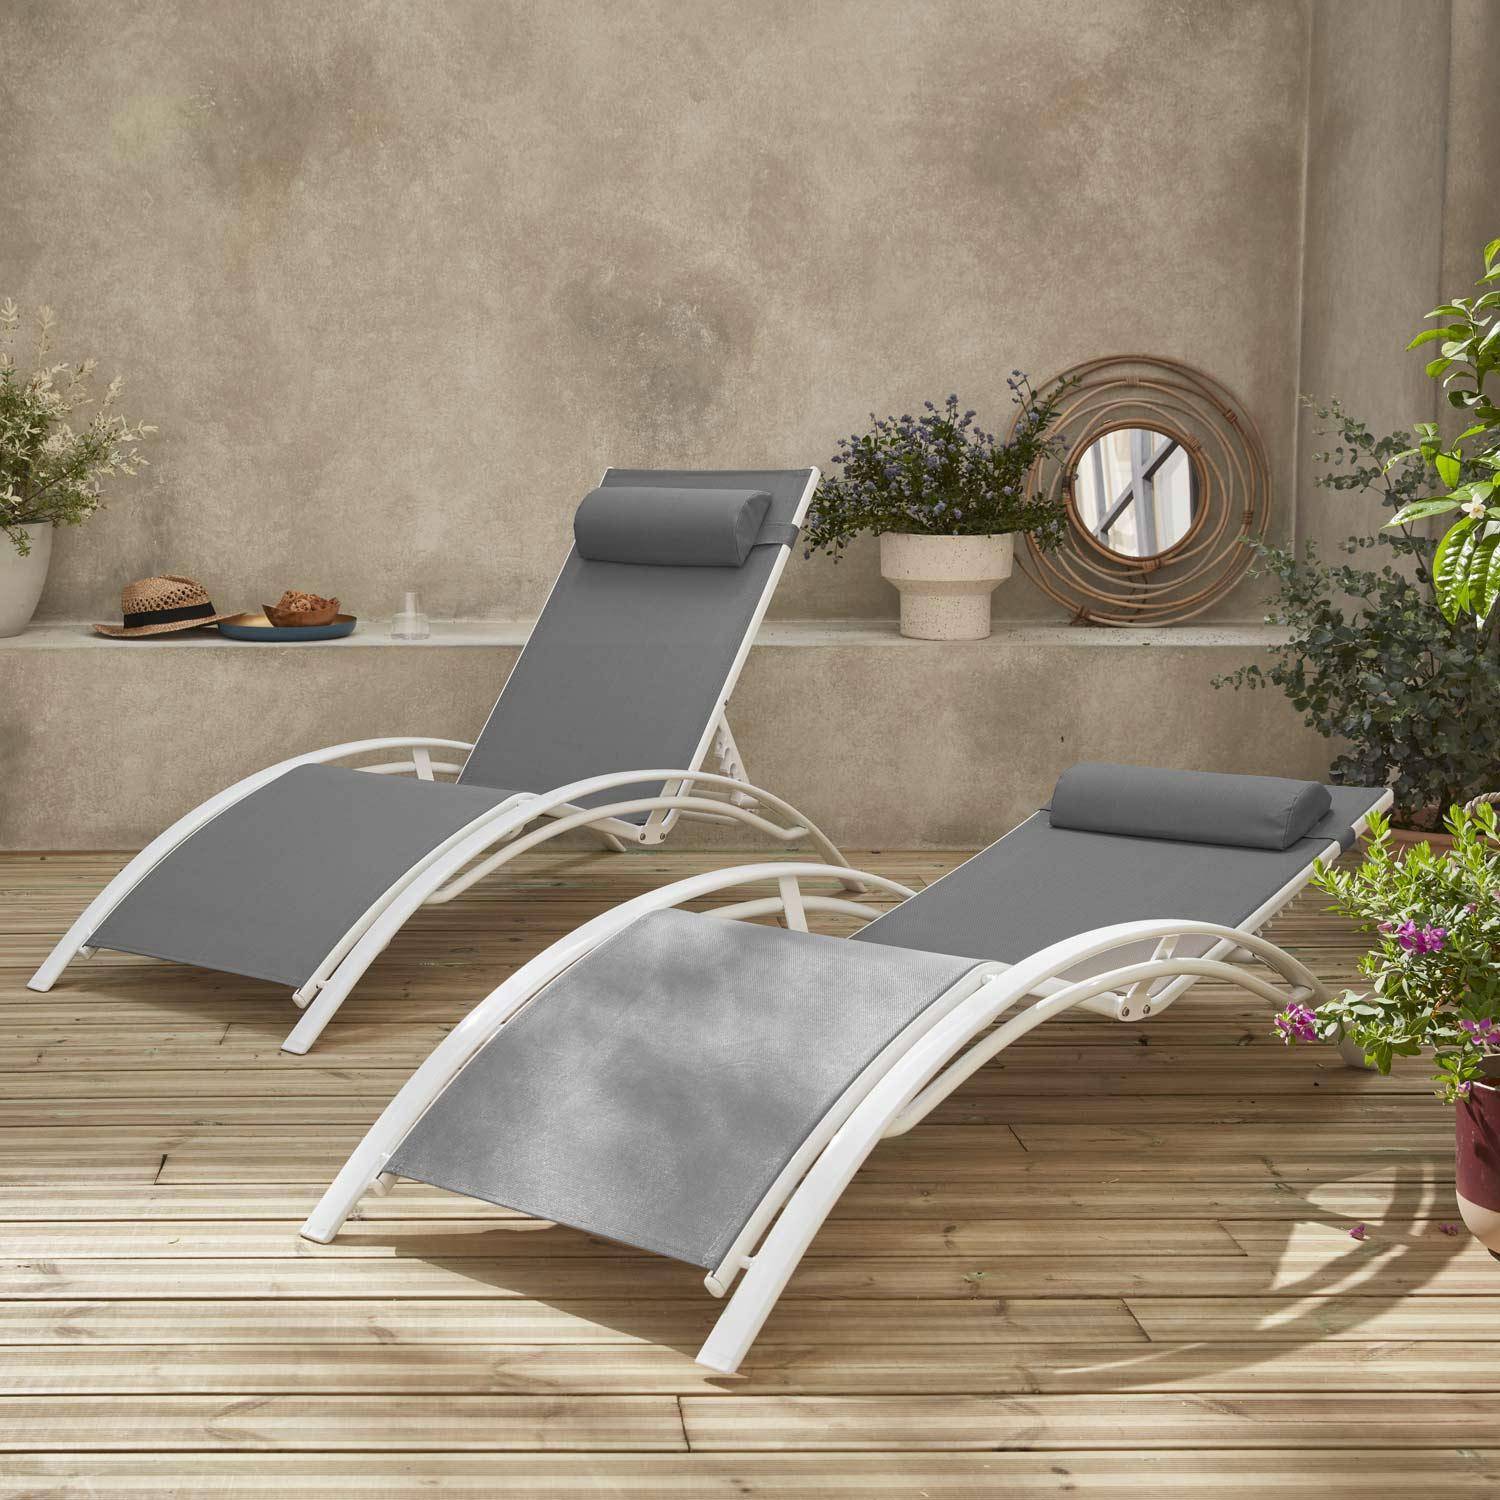 Pair of aluminium and textilene sun loungers, 4 reclining positions, headrest included, stackable - Louisa - White frame, Grey textilene Photo1